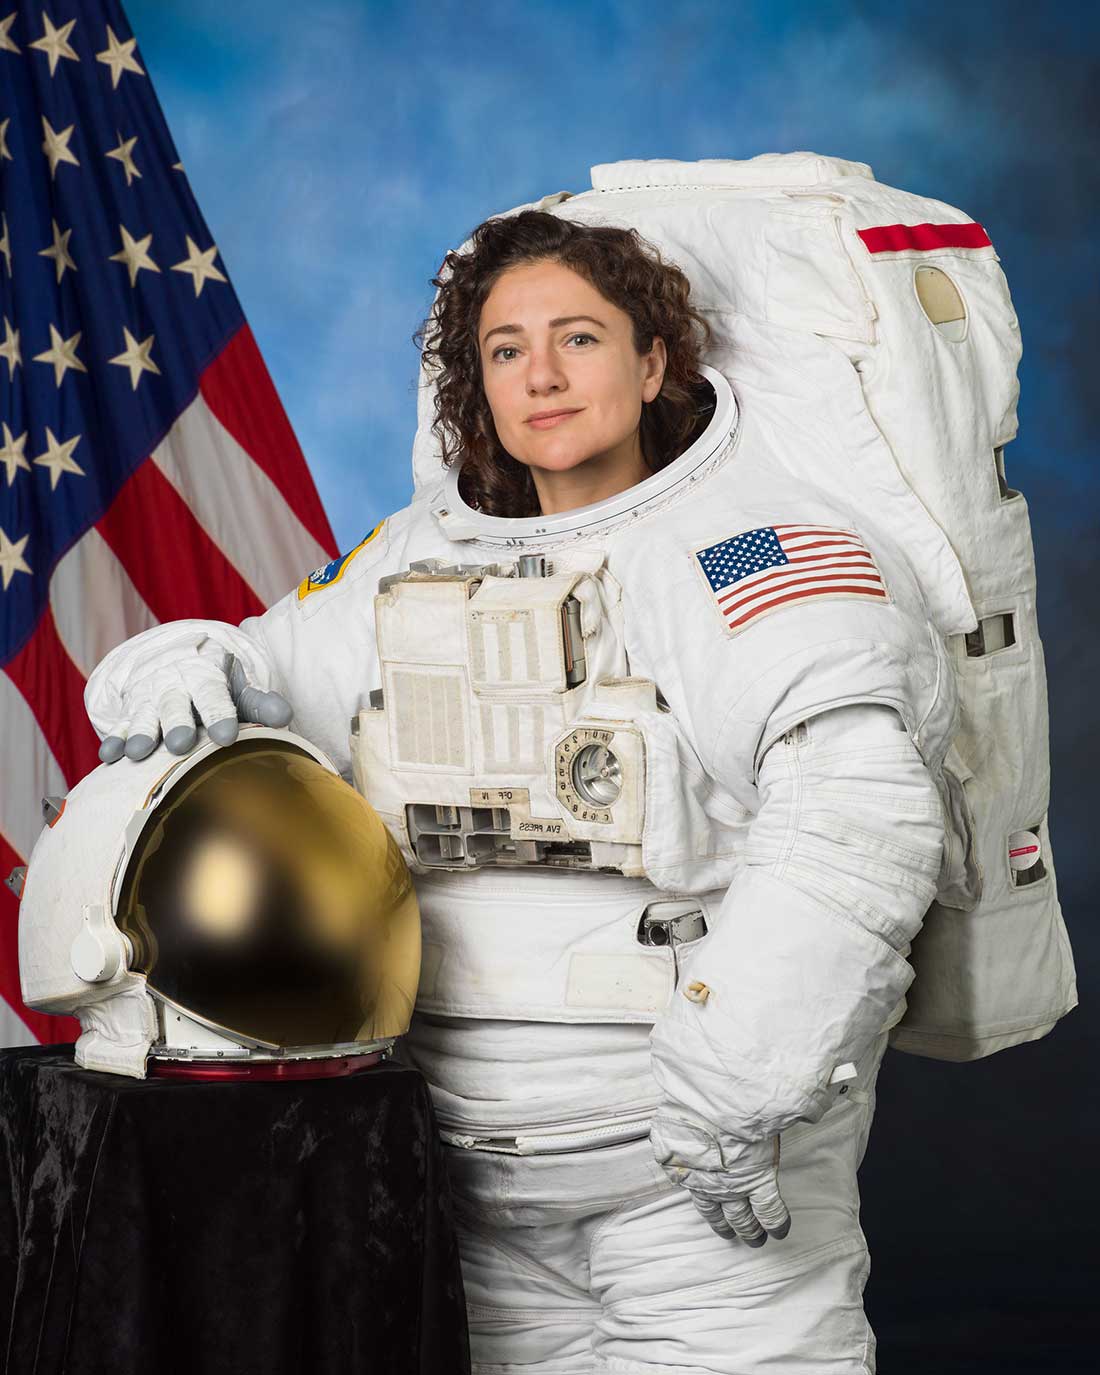 Portrait of NASA Astronaut Jessica Meir in a spacesuit.